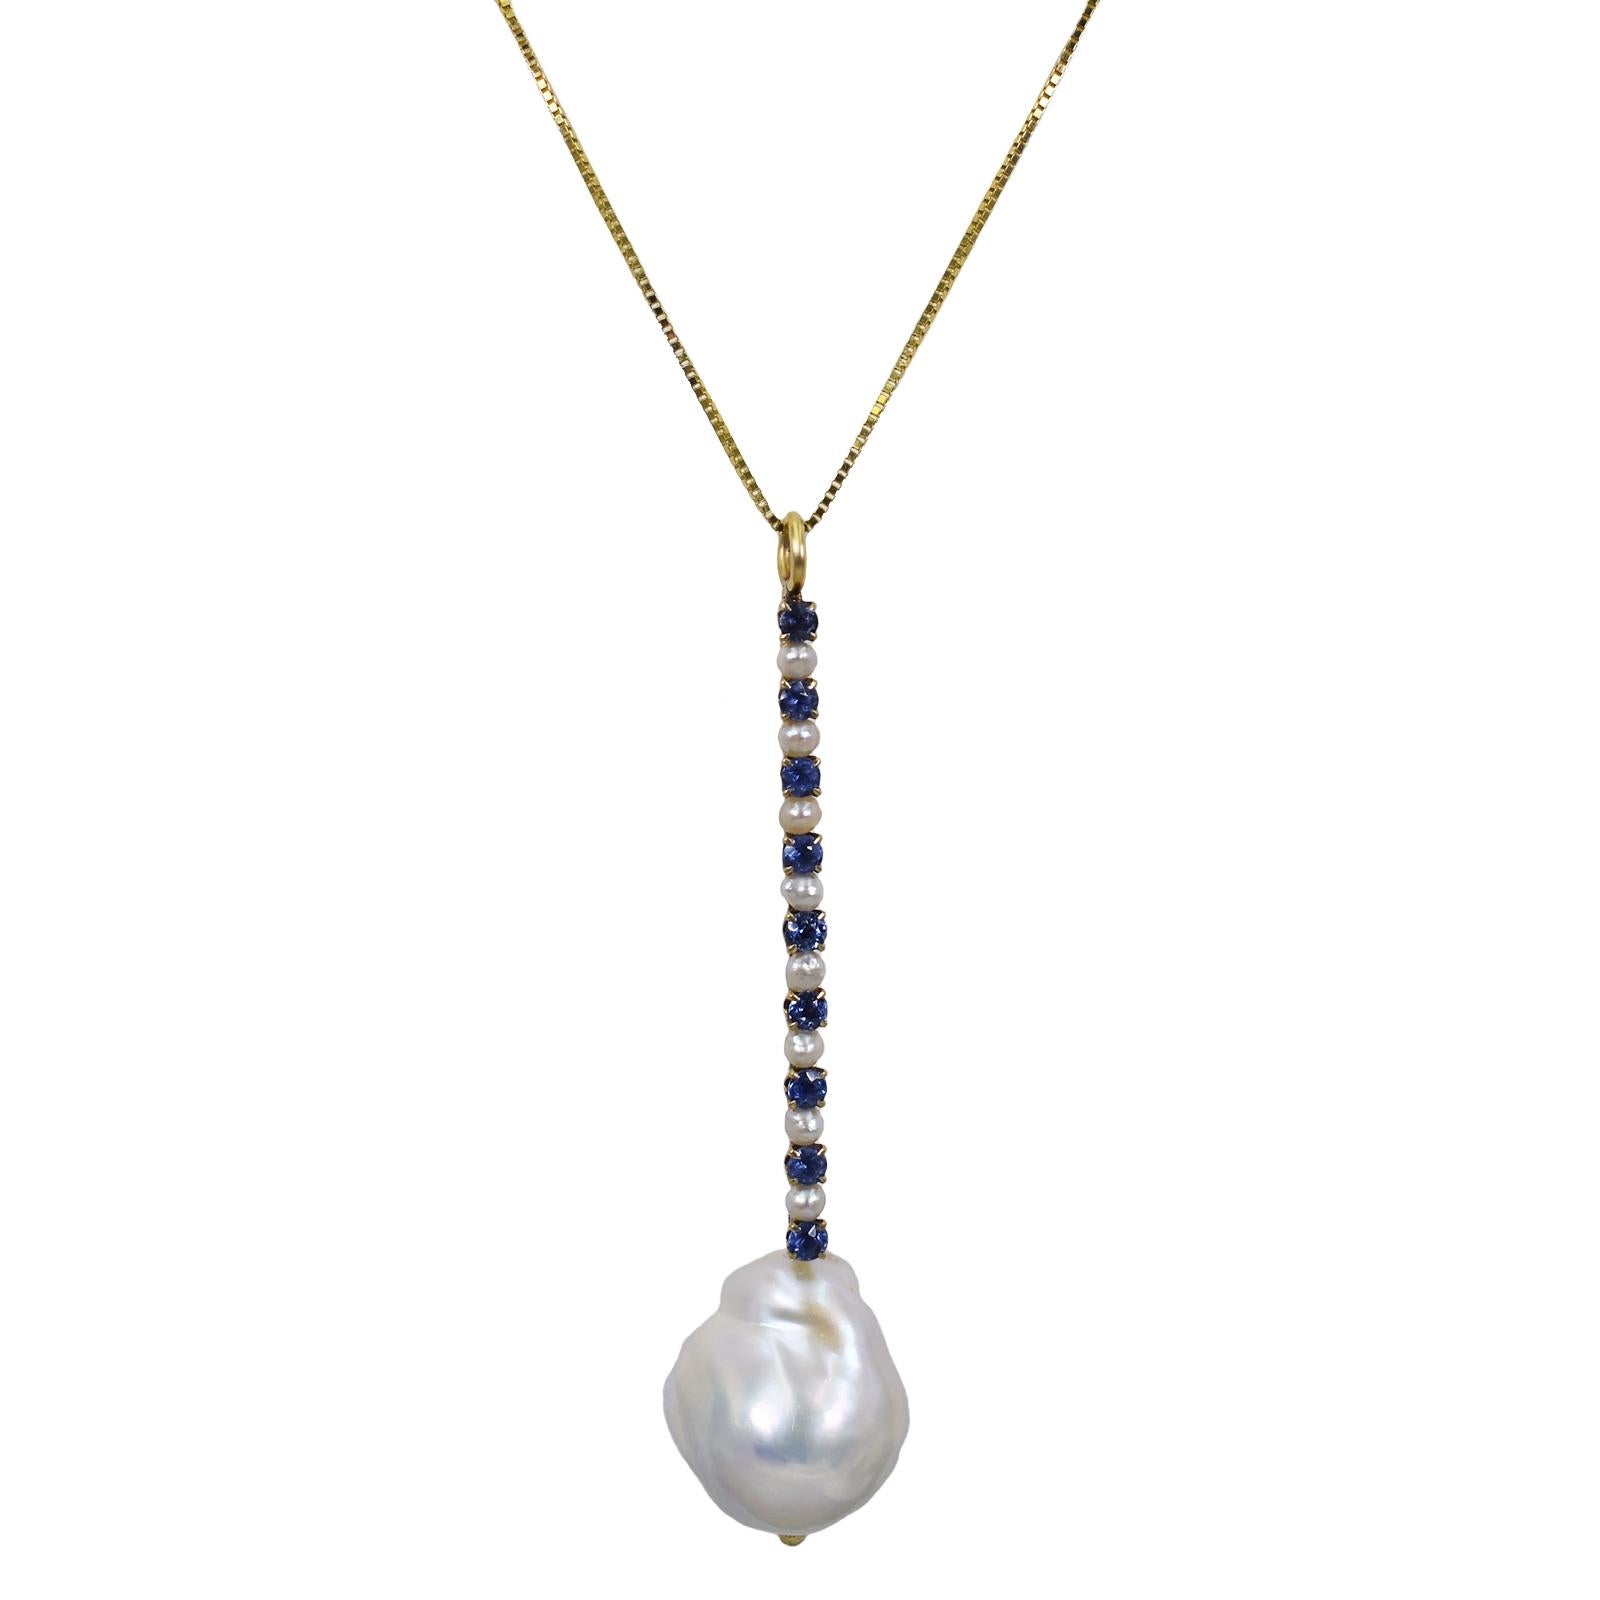 Baroque Freshwater Pearl and Blue Sapphire 14k yellow gold and sterling silver pendant necklace and cocktail ring set. Cocktail ring features a Baroque Pearl with 14k gold ribbon set with seed Pearls and Blue Sapphires on a sterling silver square